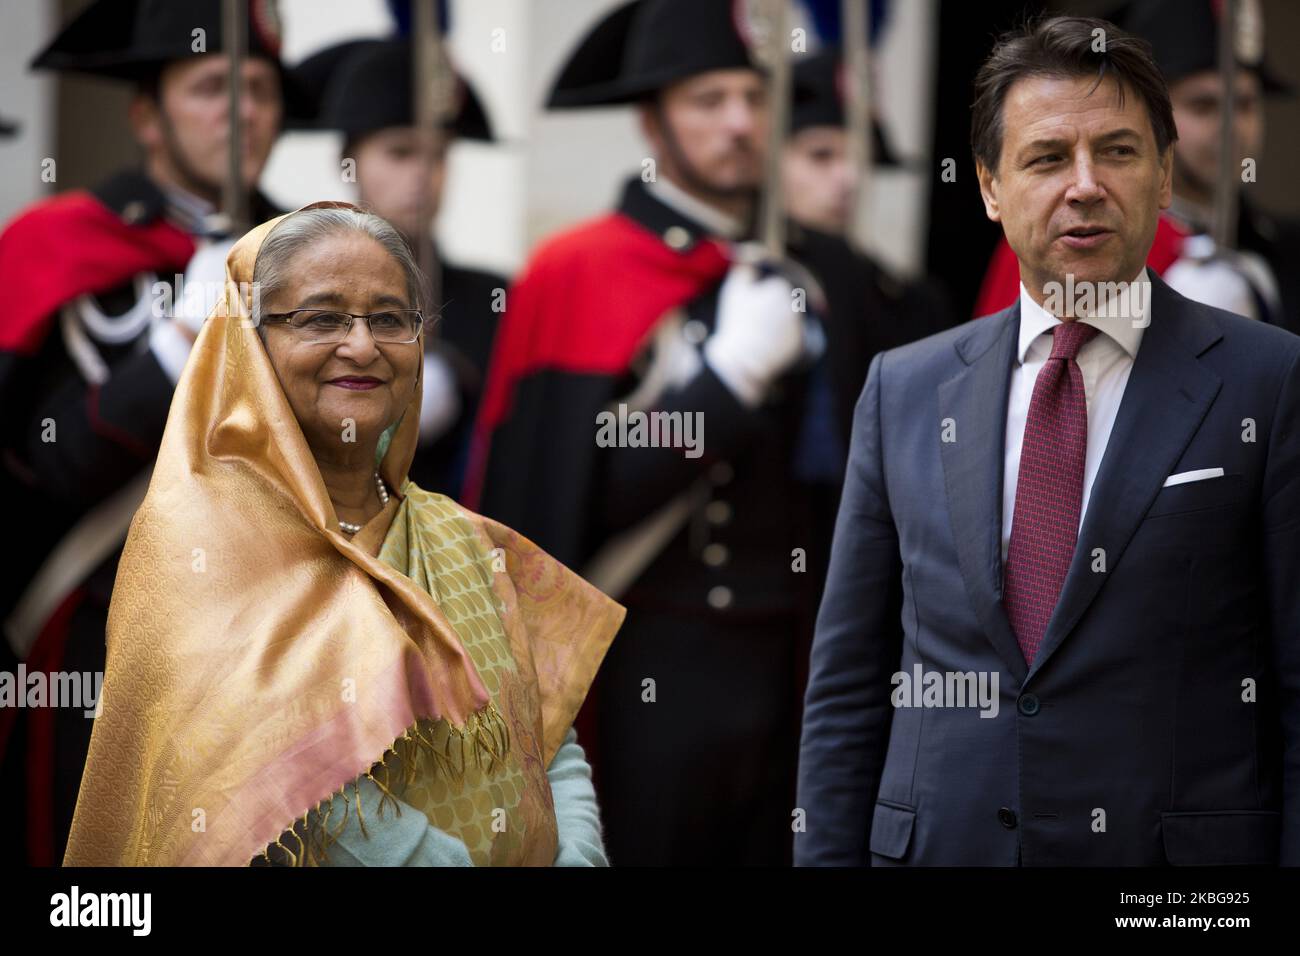 Italy's Prime Minister Giuseppe Contes welcomes Sheikh Hasina Prime Minister of Bangladesh at Chigi Palace in Rome, Italy on February 5, 2020. (Photo by Christian Minelli/NurPhoto) Stock Photo